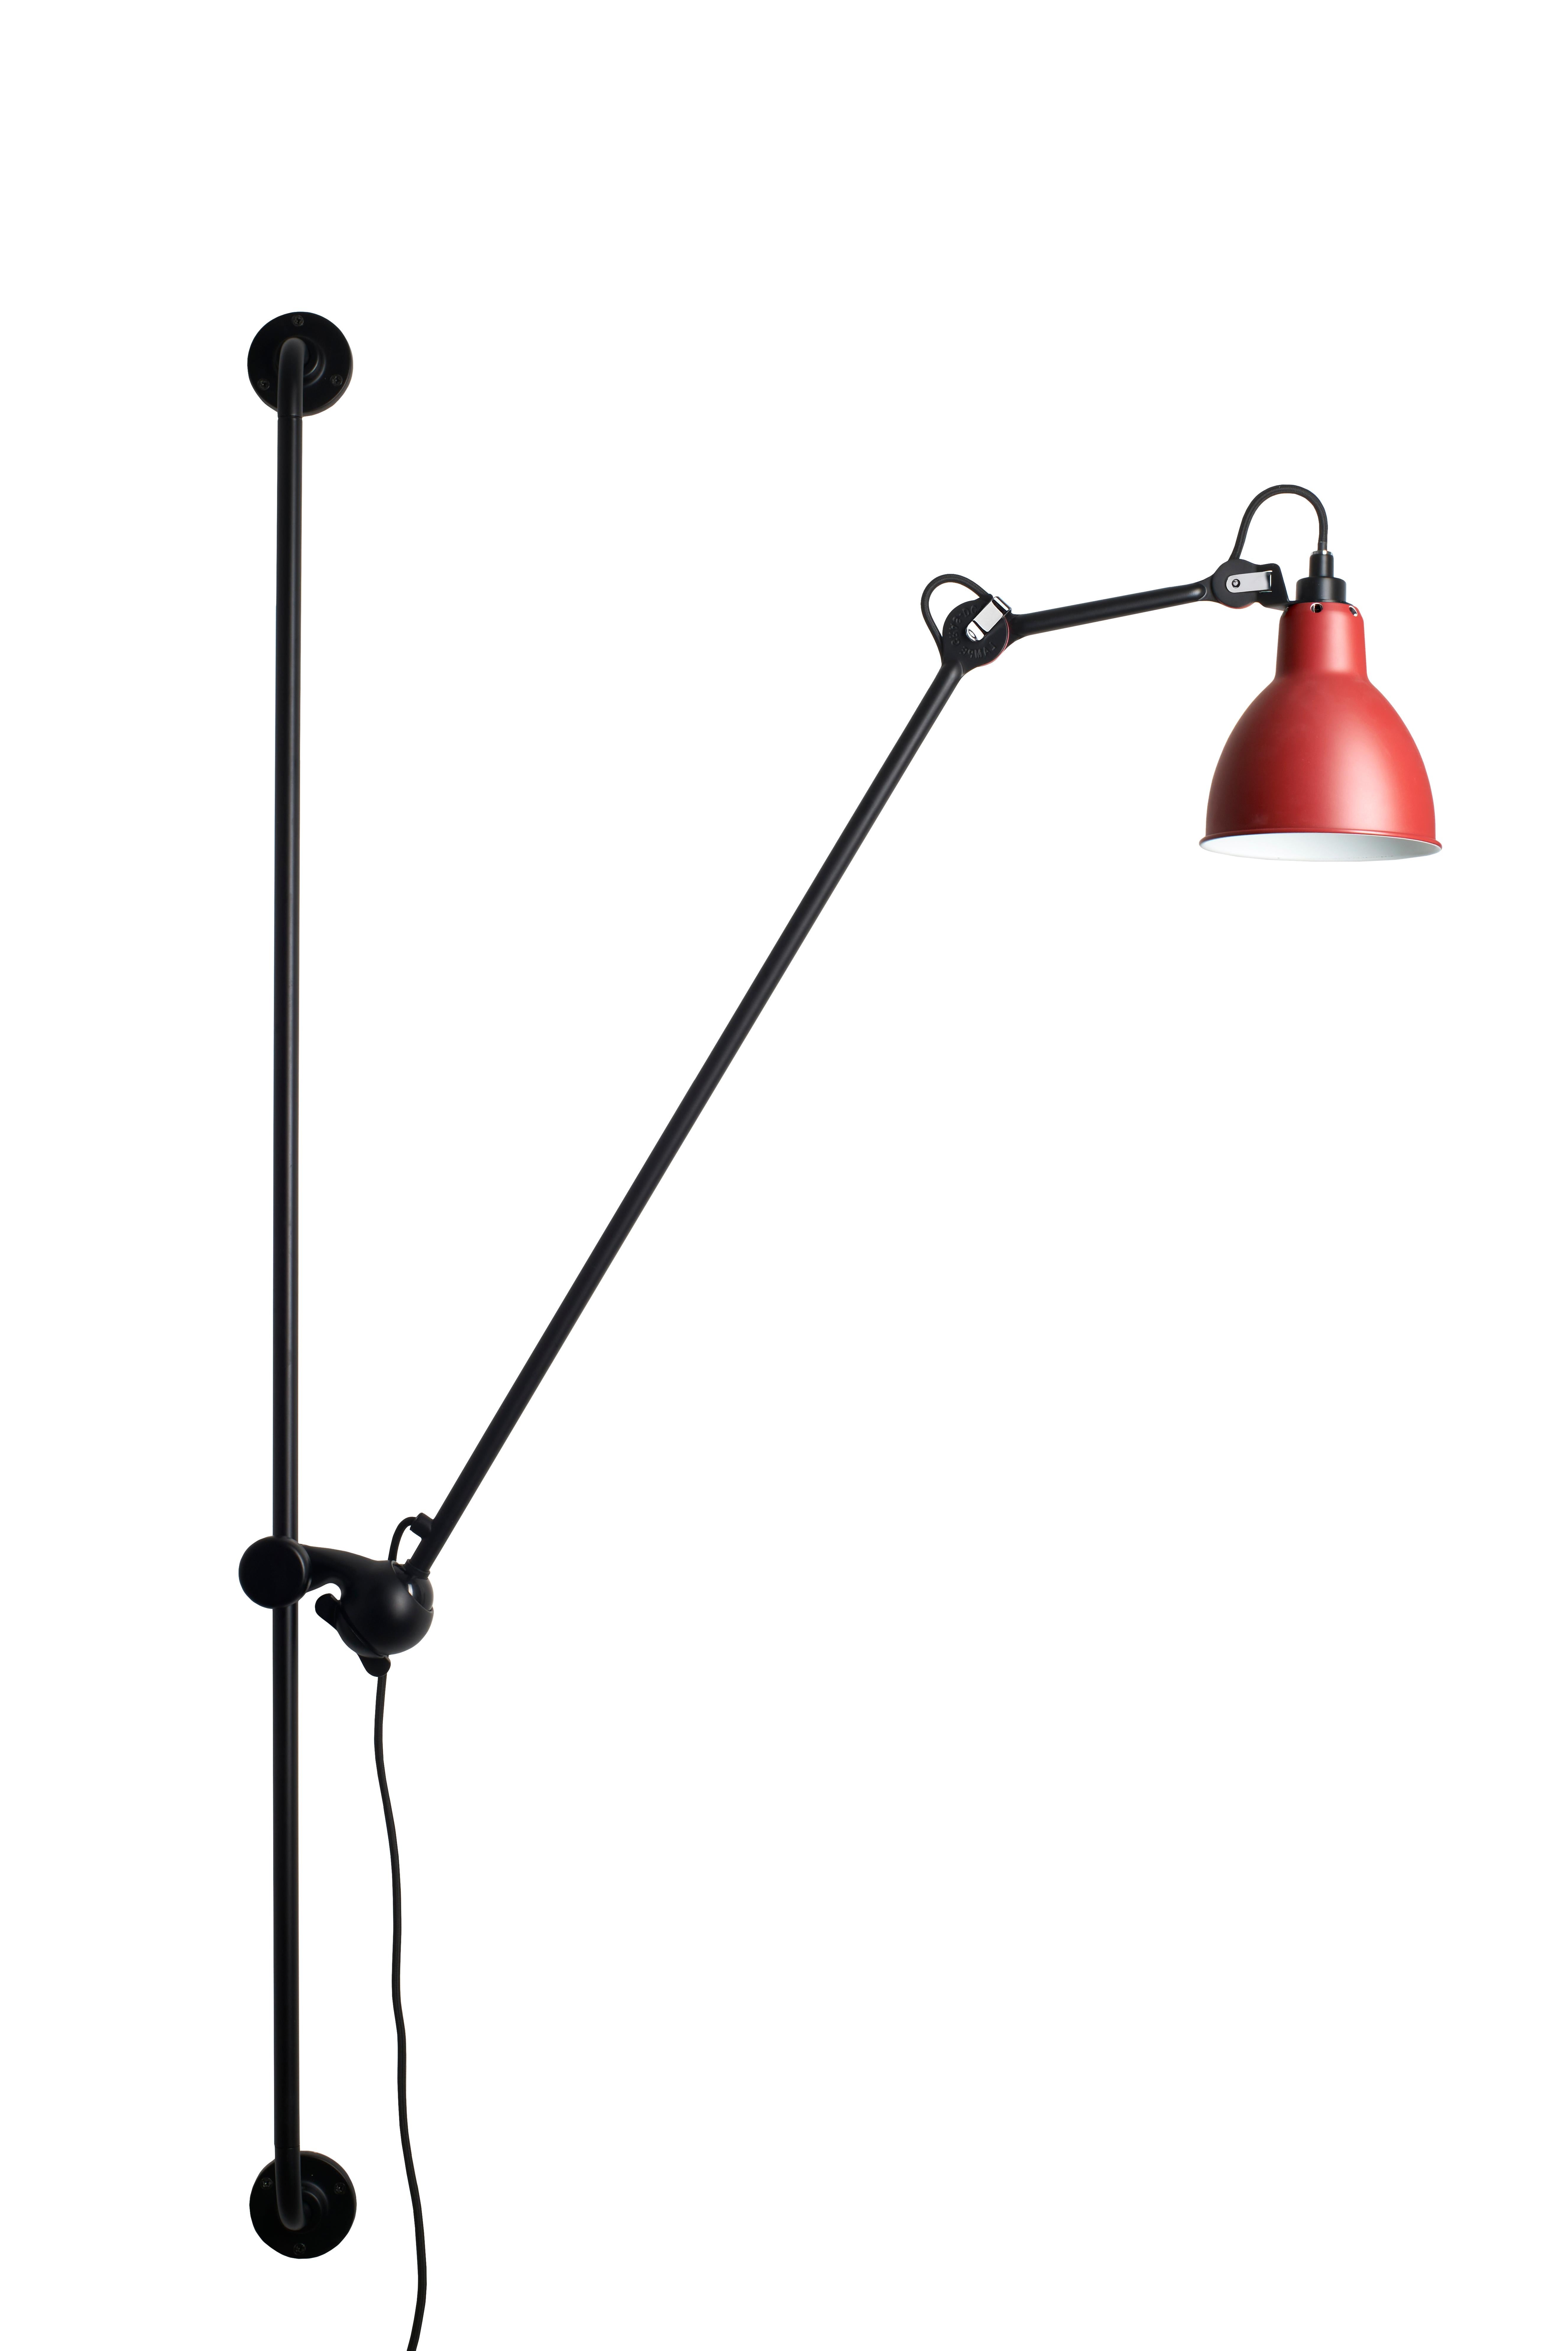 DCW Editions La Lampe Gras N°214 Round Wall Lamp in Black Arm & Red Shade